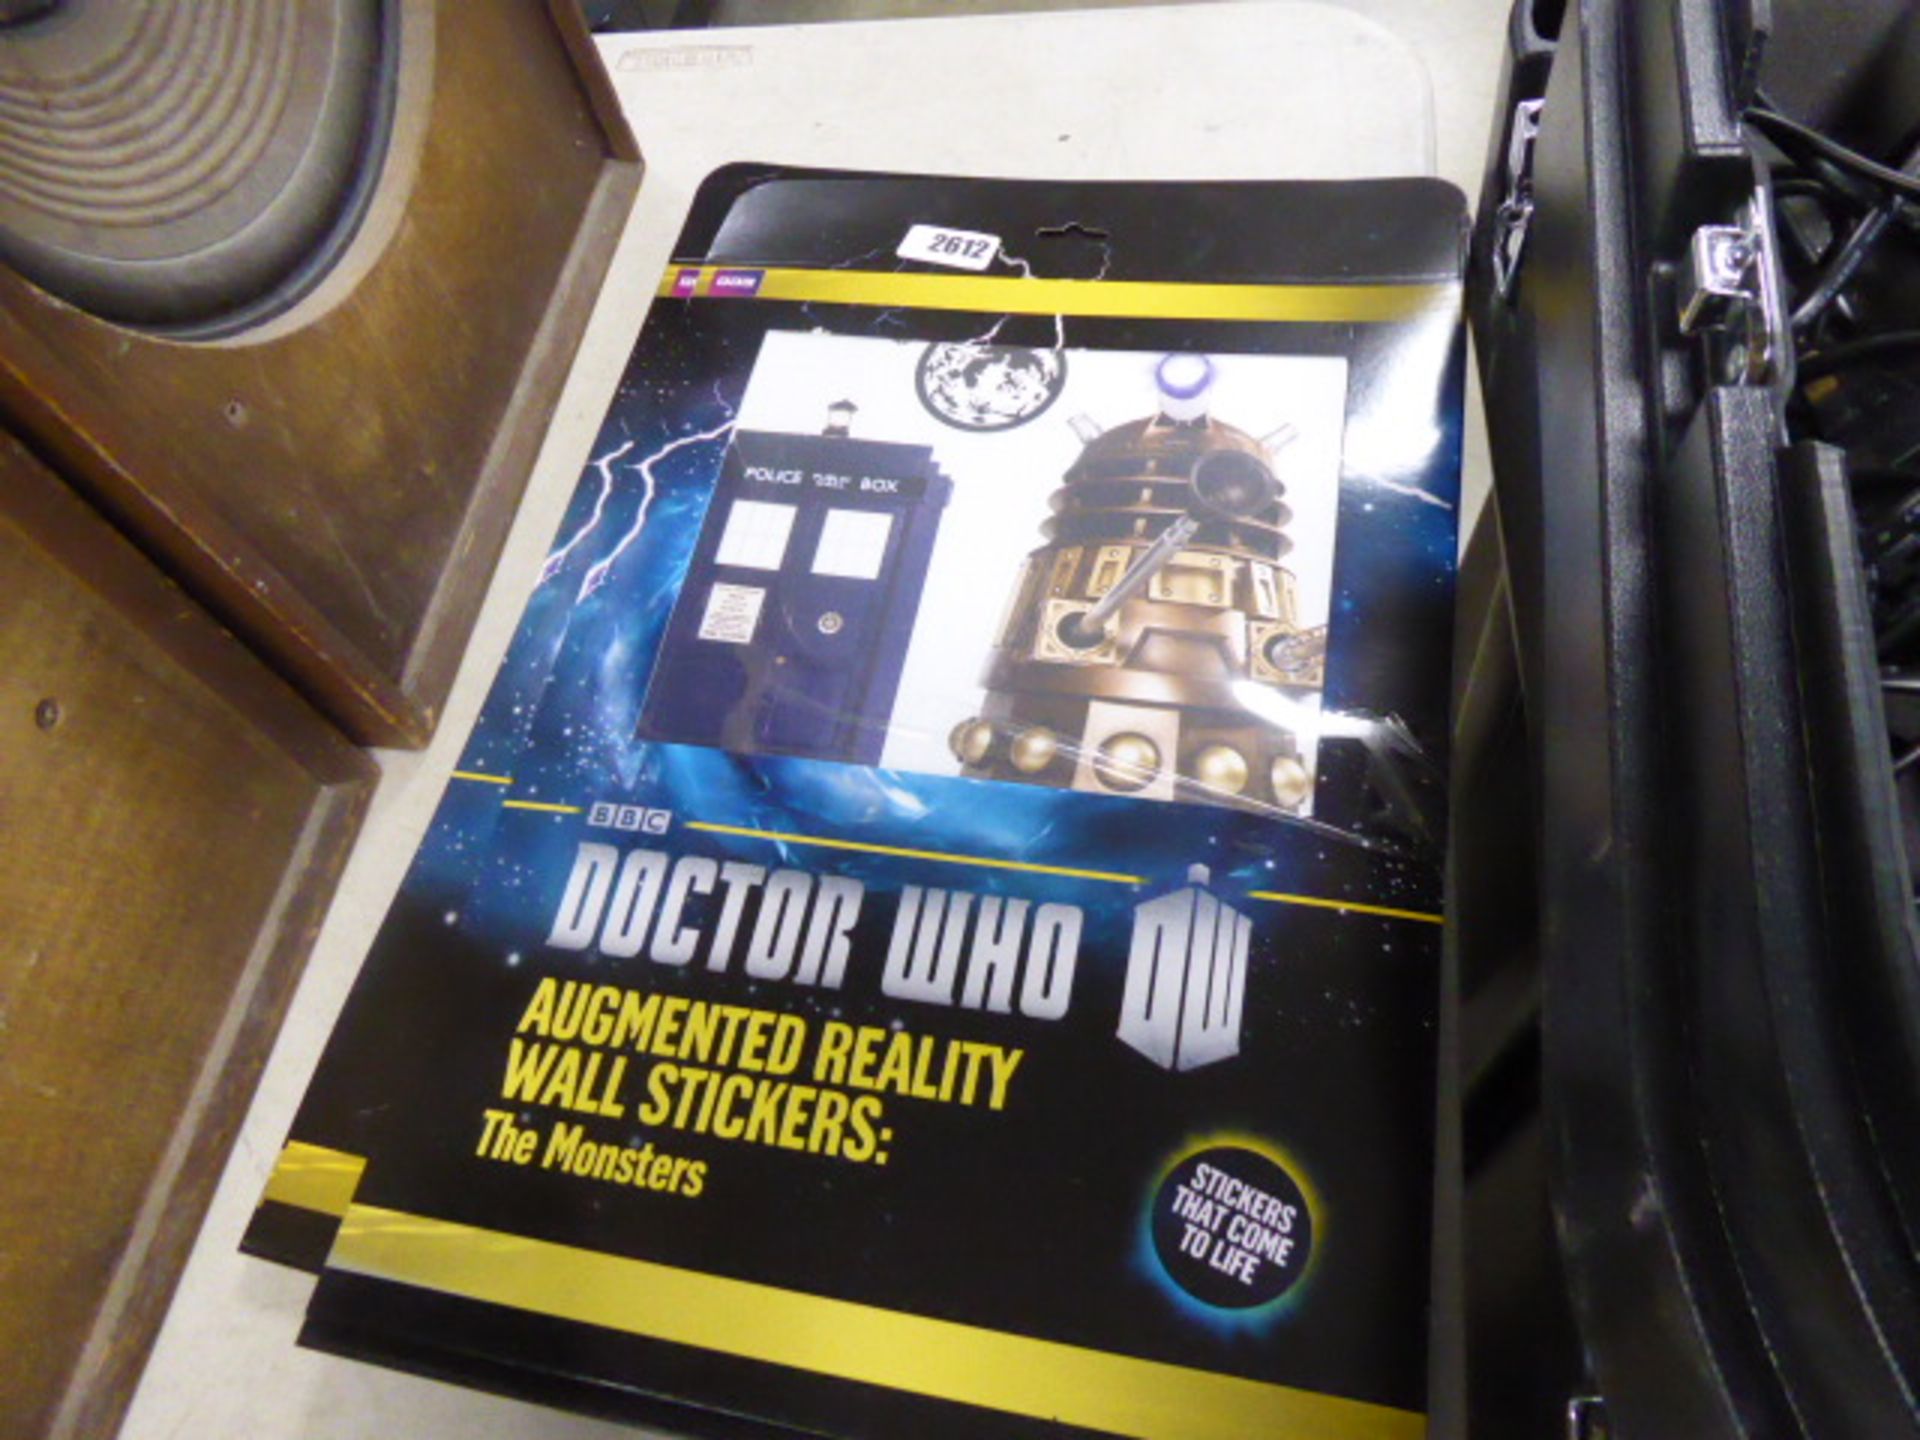 2627 - Doctor Who augmented reality wall stickers